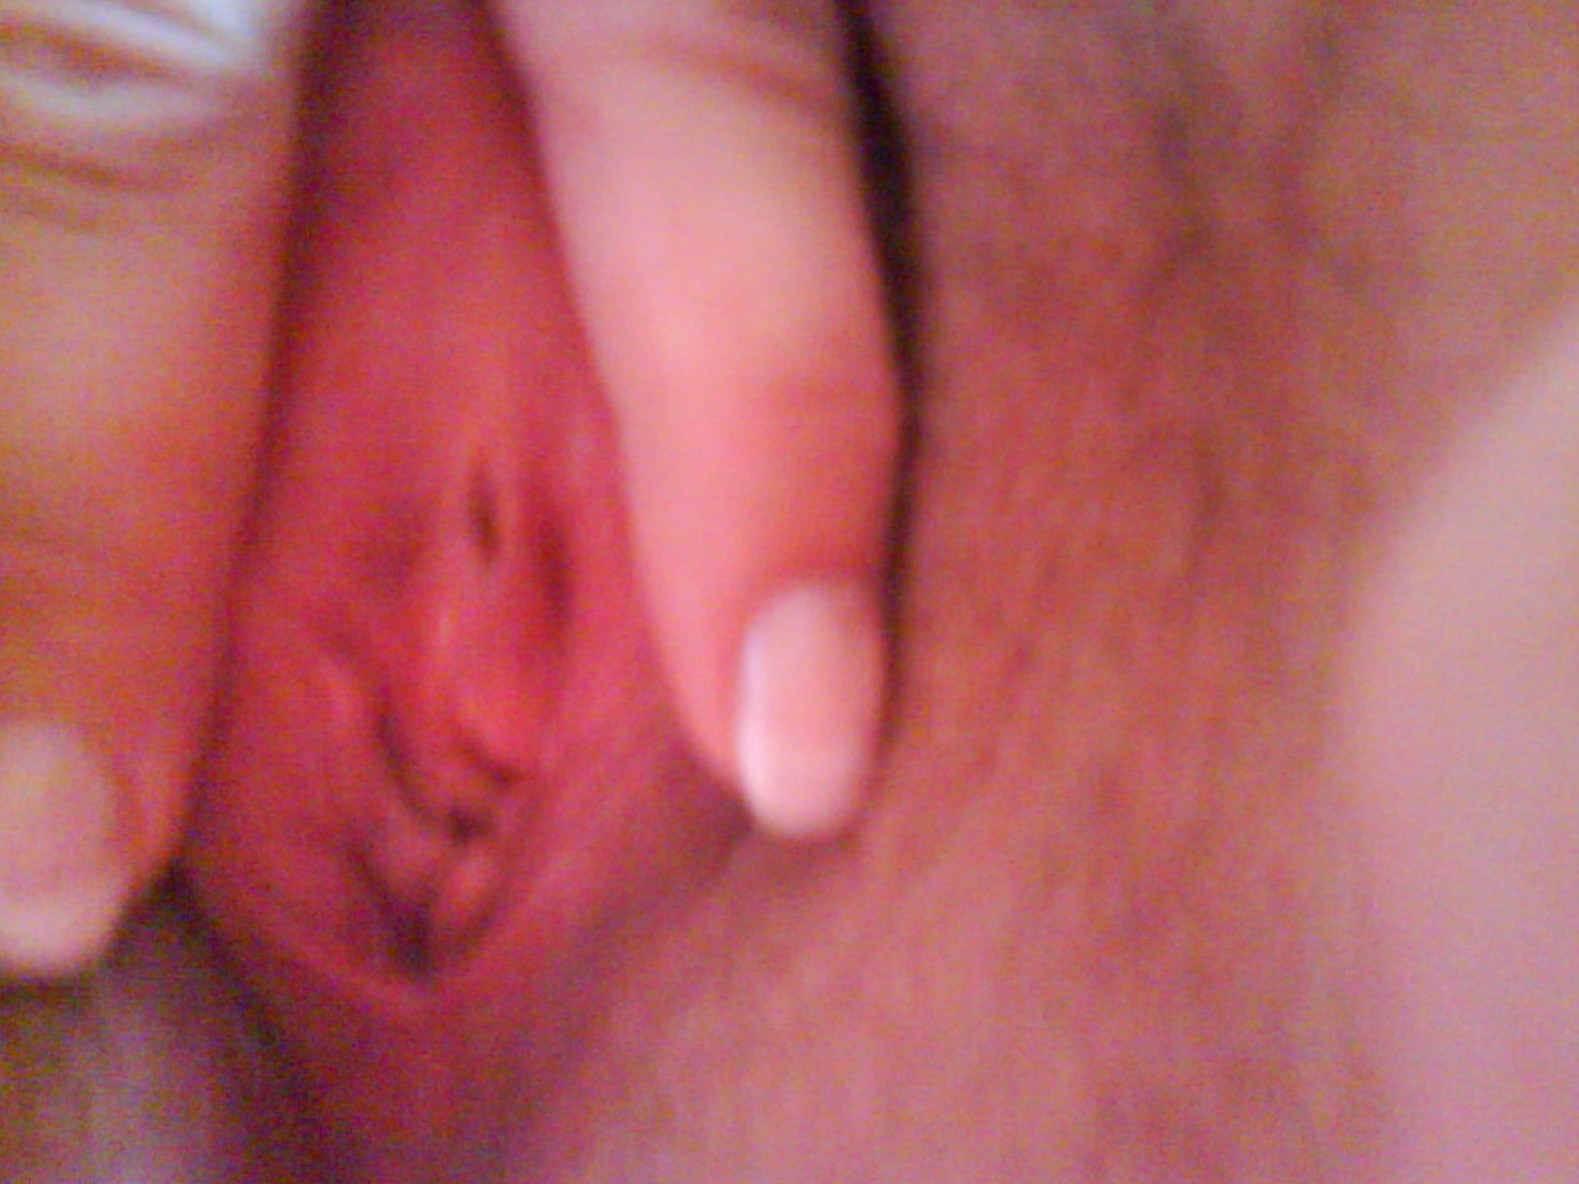 come on boys can you fill my hole